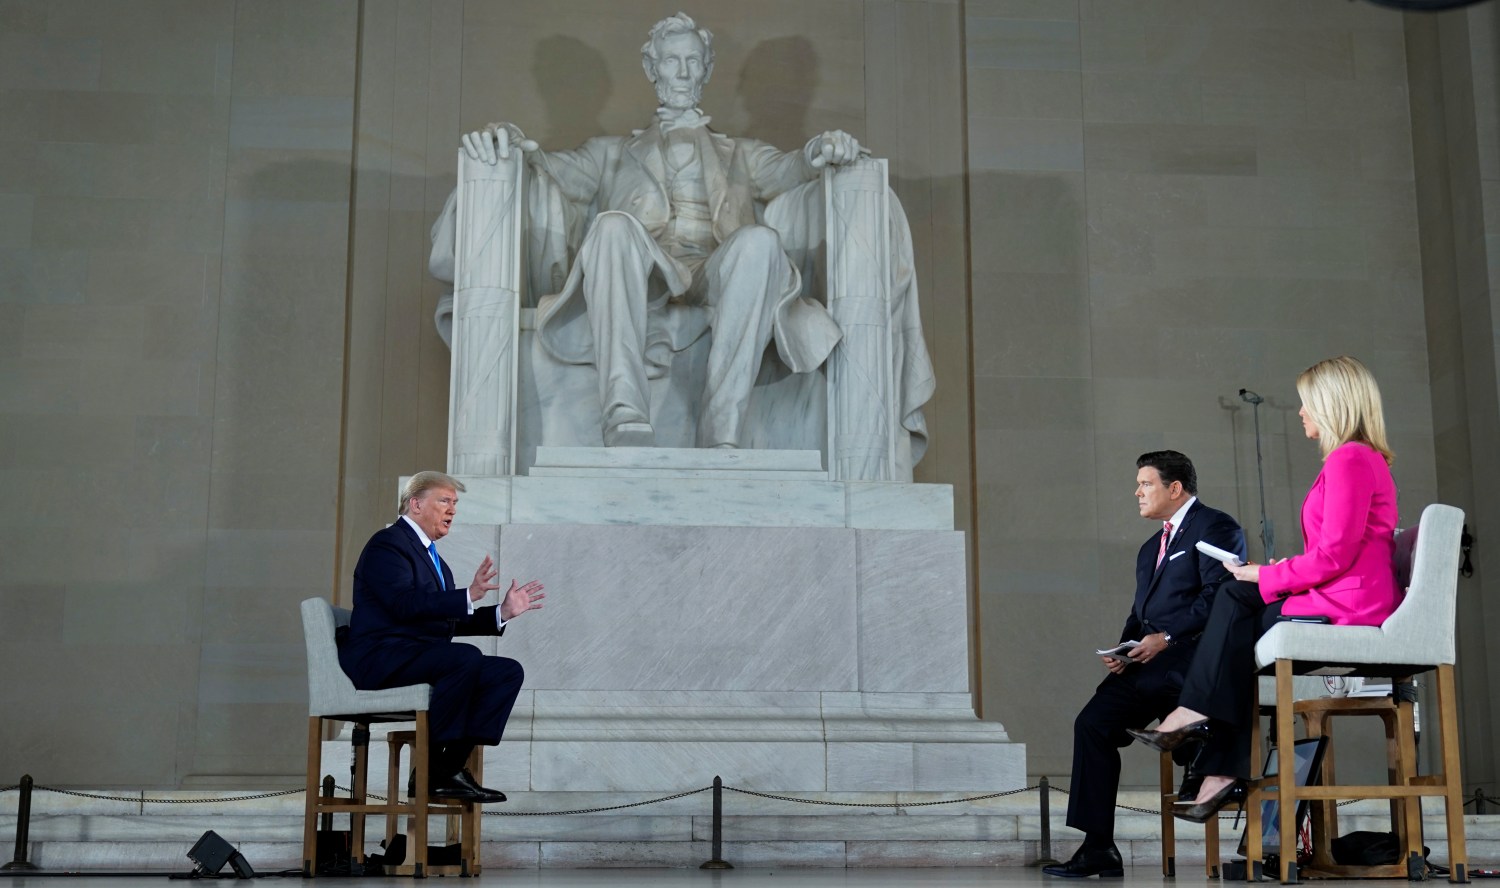 U.S. President Donald Trump is interviewed by hosts hosts Bret Baier and Martha MacCallum during a Fox News Channel virtual town hall called "America Together: Returning to Work" about the response to the coronavirus disease (COVID-19) pandemic while sitting in front of the statue of former President Abraham Lincoln inside the Lincoln Memorial in Washington, U.S. May 3, 2020.  REUTERS/Joshua Roberts